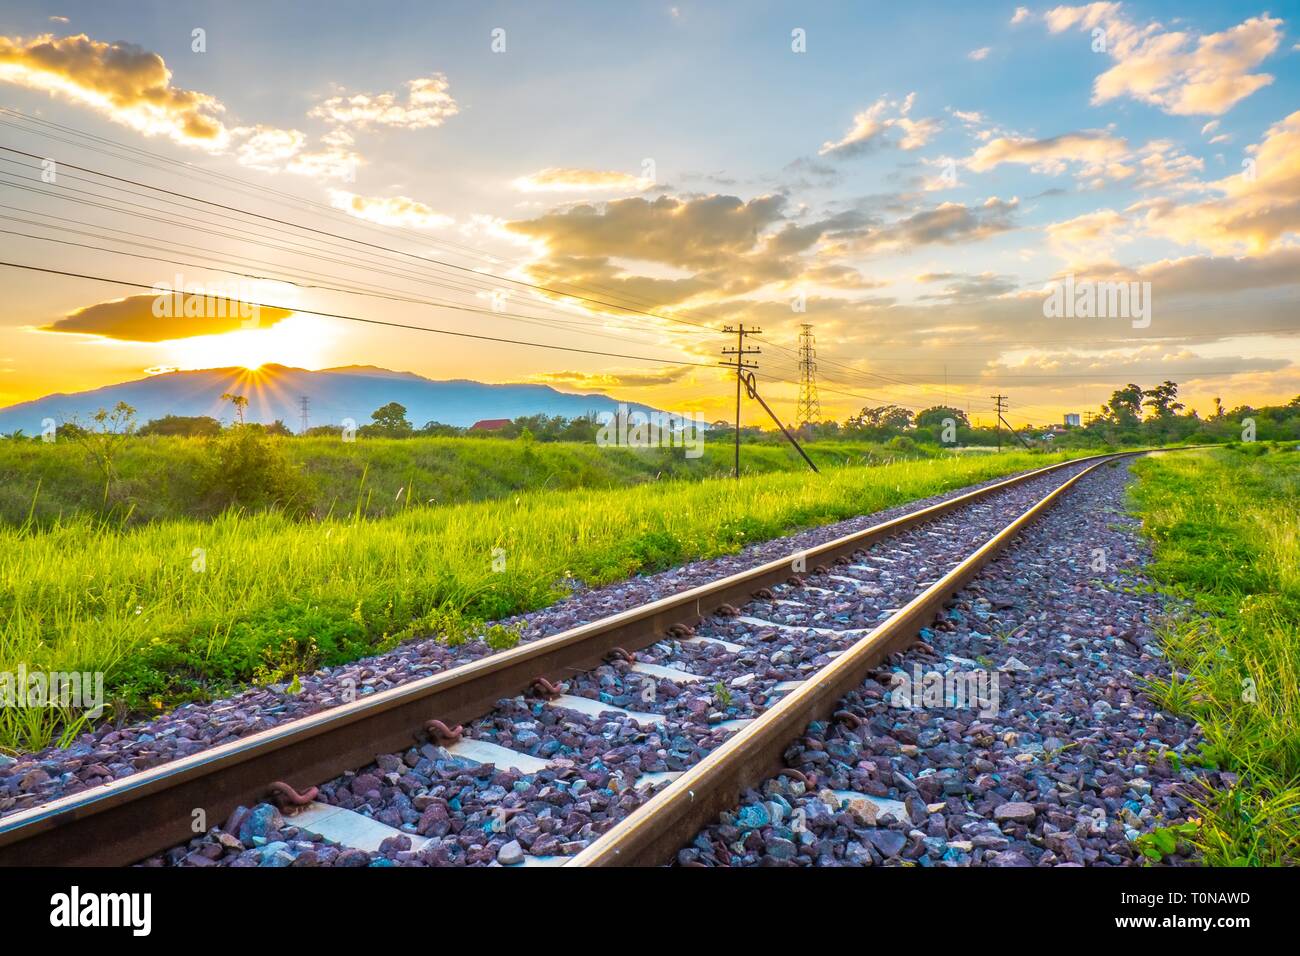 railroad» 1080P, 2k, 4k HD wallpapers, backgrounds free download | Rare  Gallery